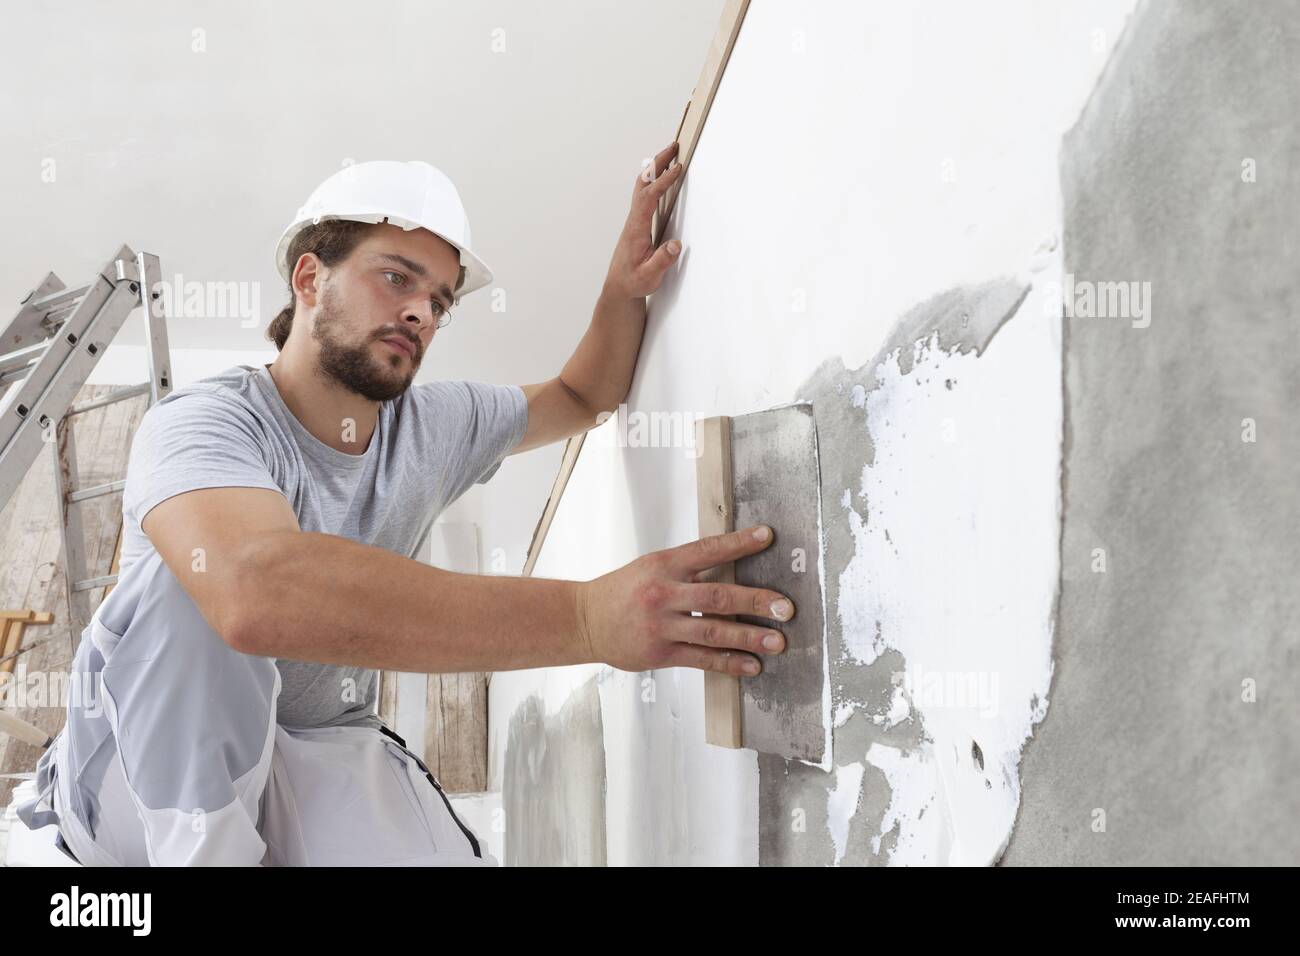 Hands man plasterer construction worker at work with trowel, plastering a wall, closeup Stock Photo